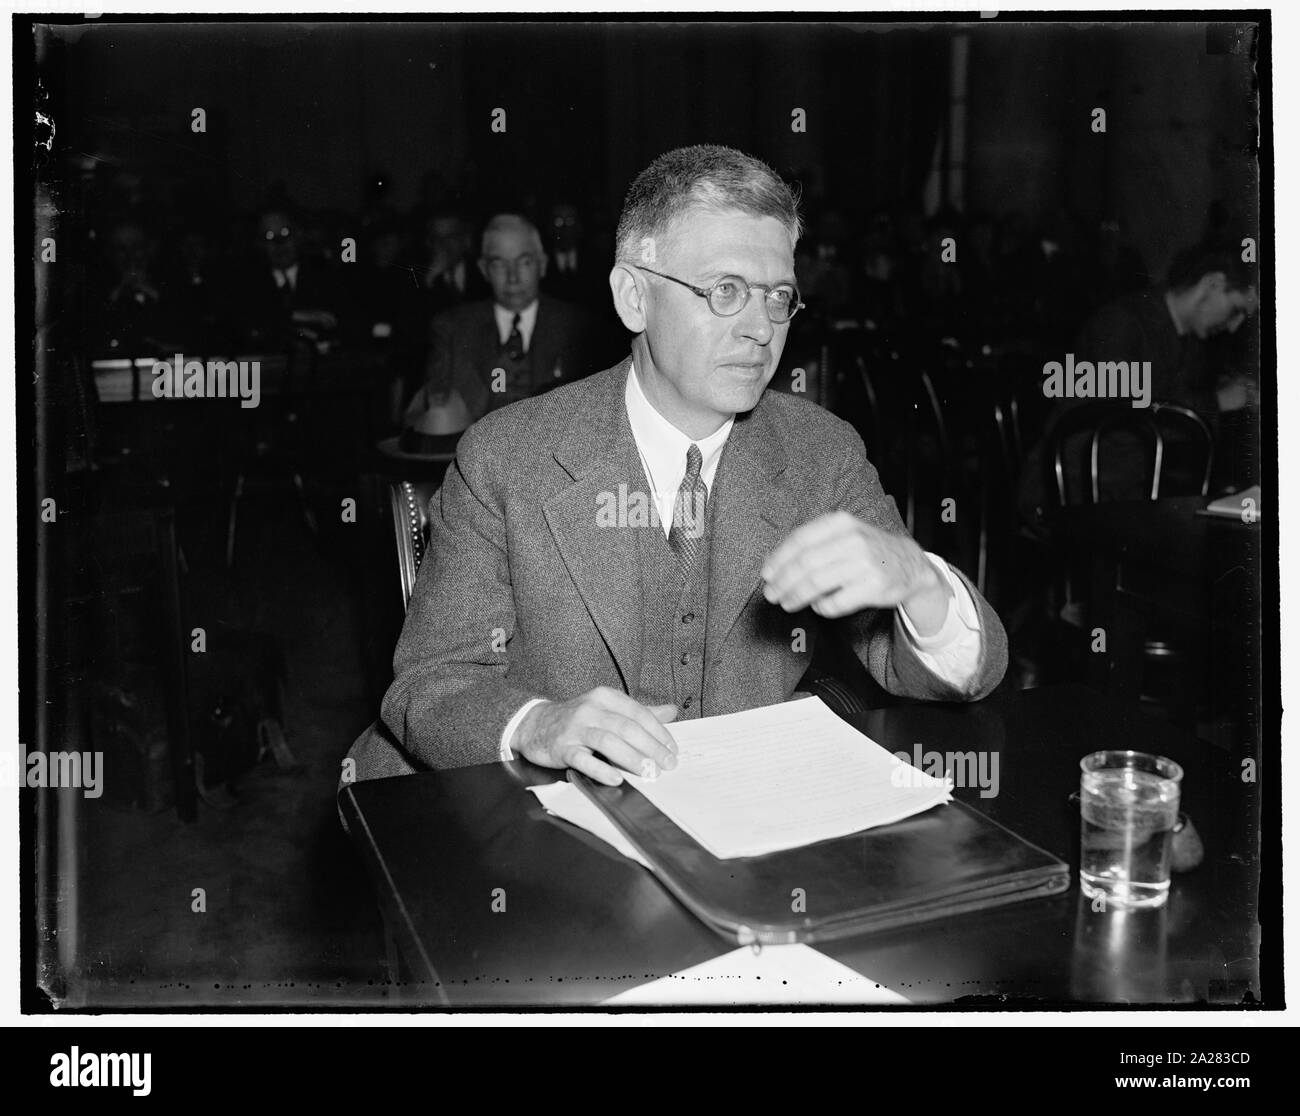 Princeton Prexy gives Senate Committee views on president's court reform plan. Washington, D.C., March 24. Harold W. Doods, President of Princeton University, testifying before the Senate Judiciary Committee today pictured the President's court reorganization plan as a scheme by which President Roosevelt hopes to control the opinions of the court. The committee is now hearing witnesses opposed to the president's plan, 3/24/1937 Stock Photo